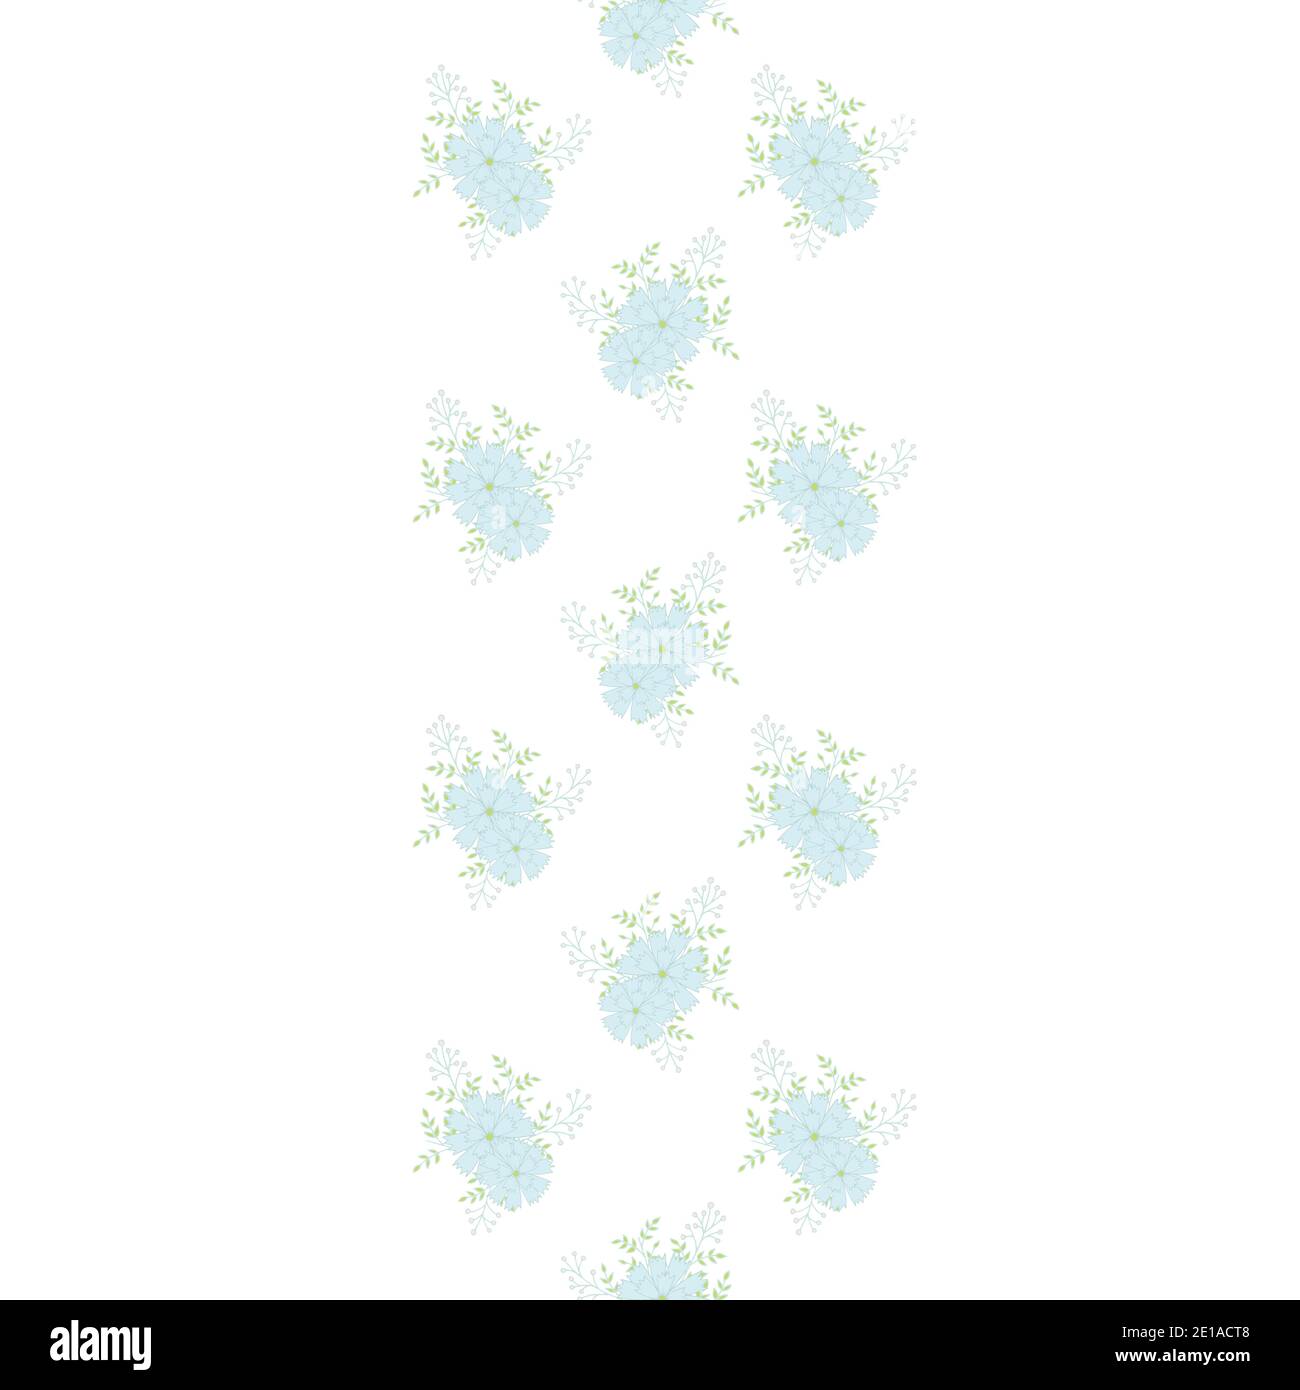 Floral Vector repeat seamless border with carnations. Small bouquets with blue flowers. Stock Vector